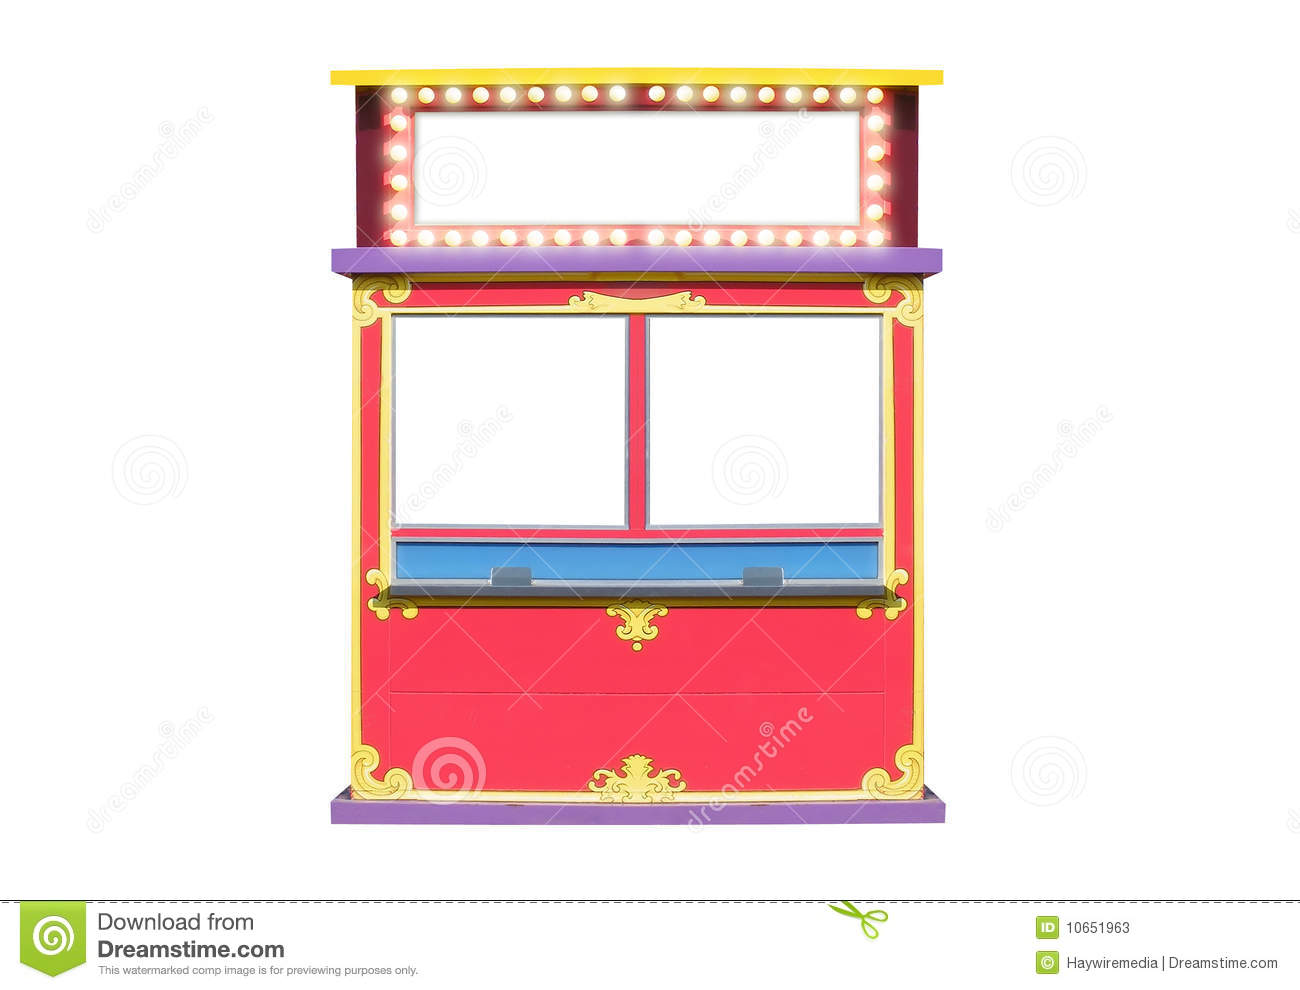 Carnival Ticket Booth Clip Art Circus Carnival Ticket Booth